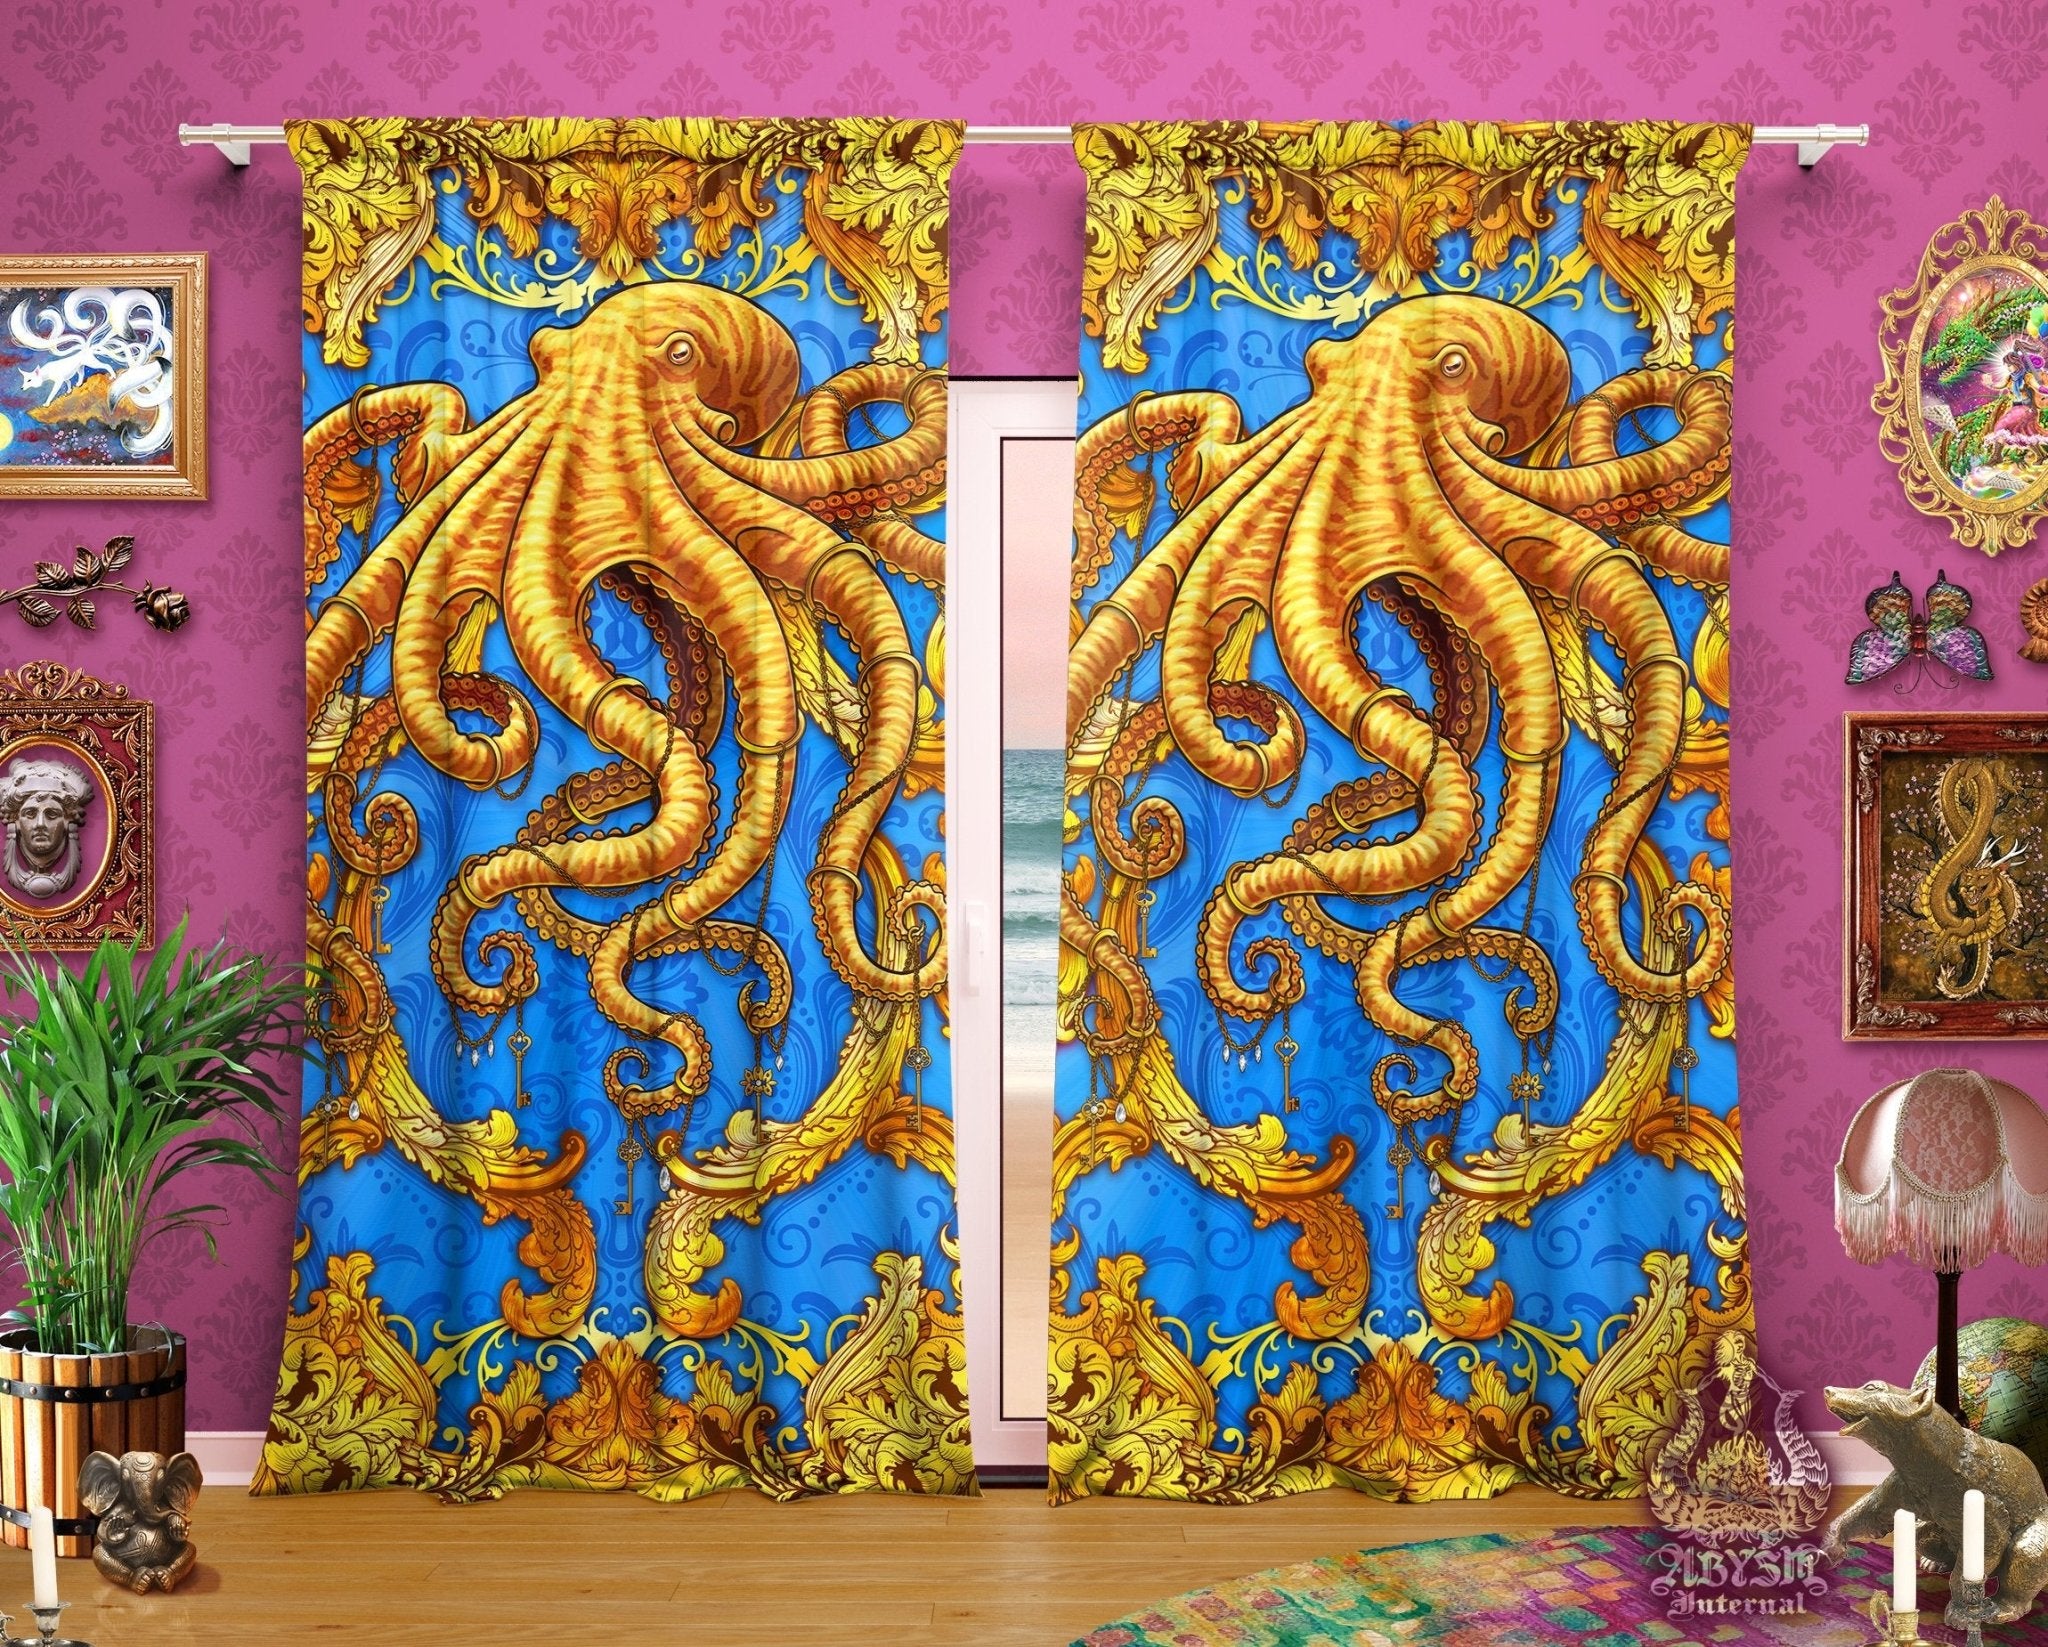 Octopus Blackout Curtains, Long Window Panels, Beach Indie Room Decor, Art Print, Funky and Eclectic Home Decor - Cyan & Gold - Abysm Internal